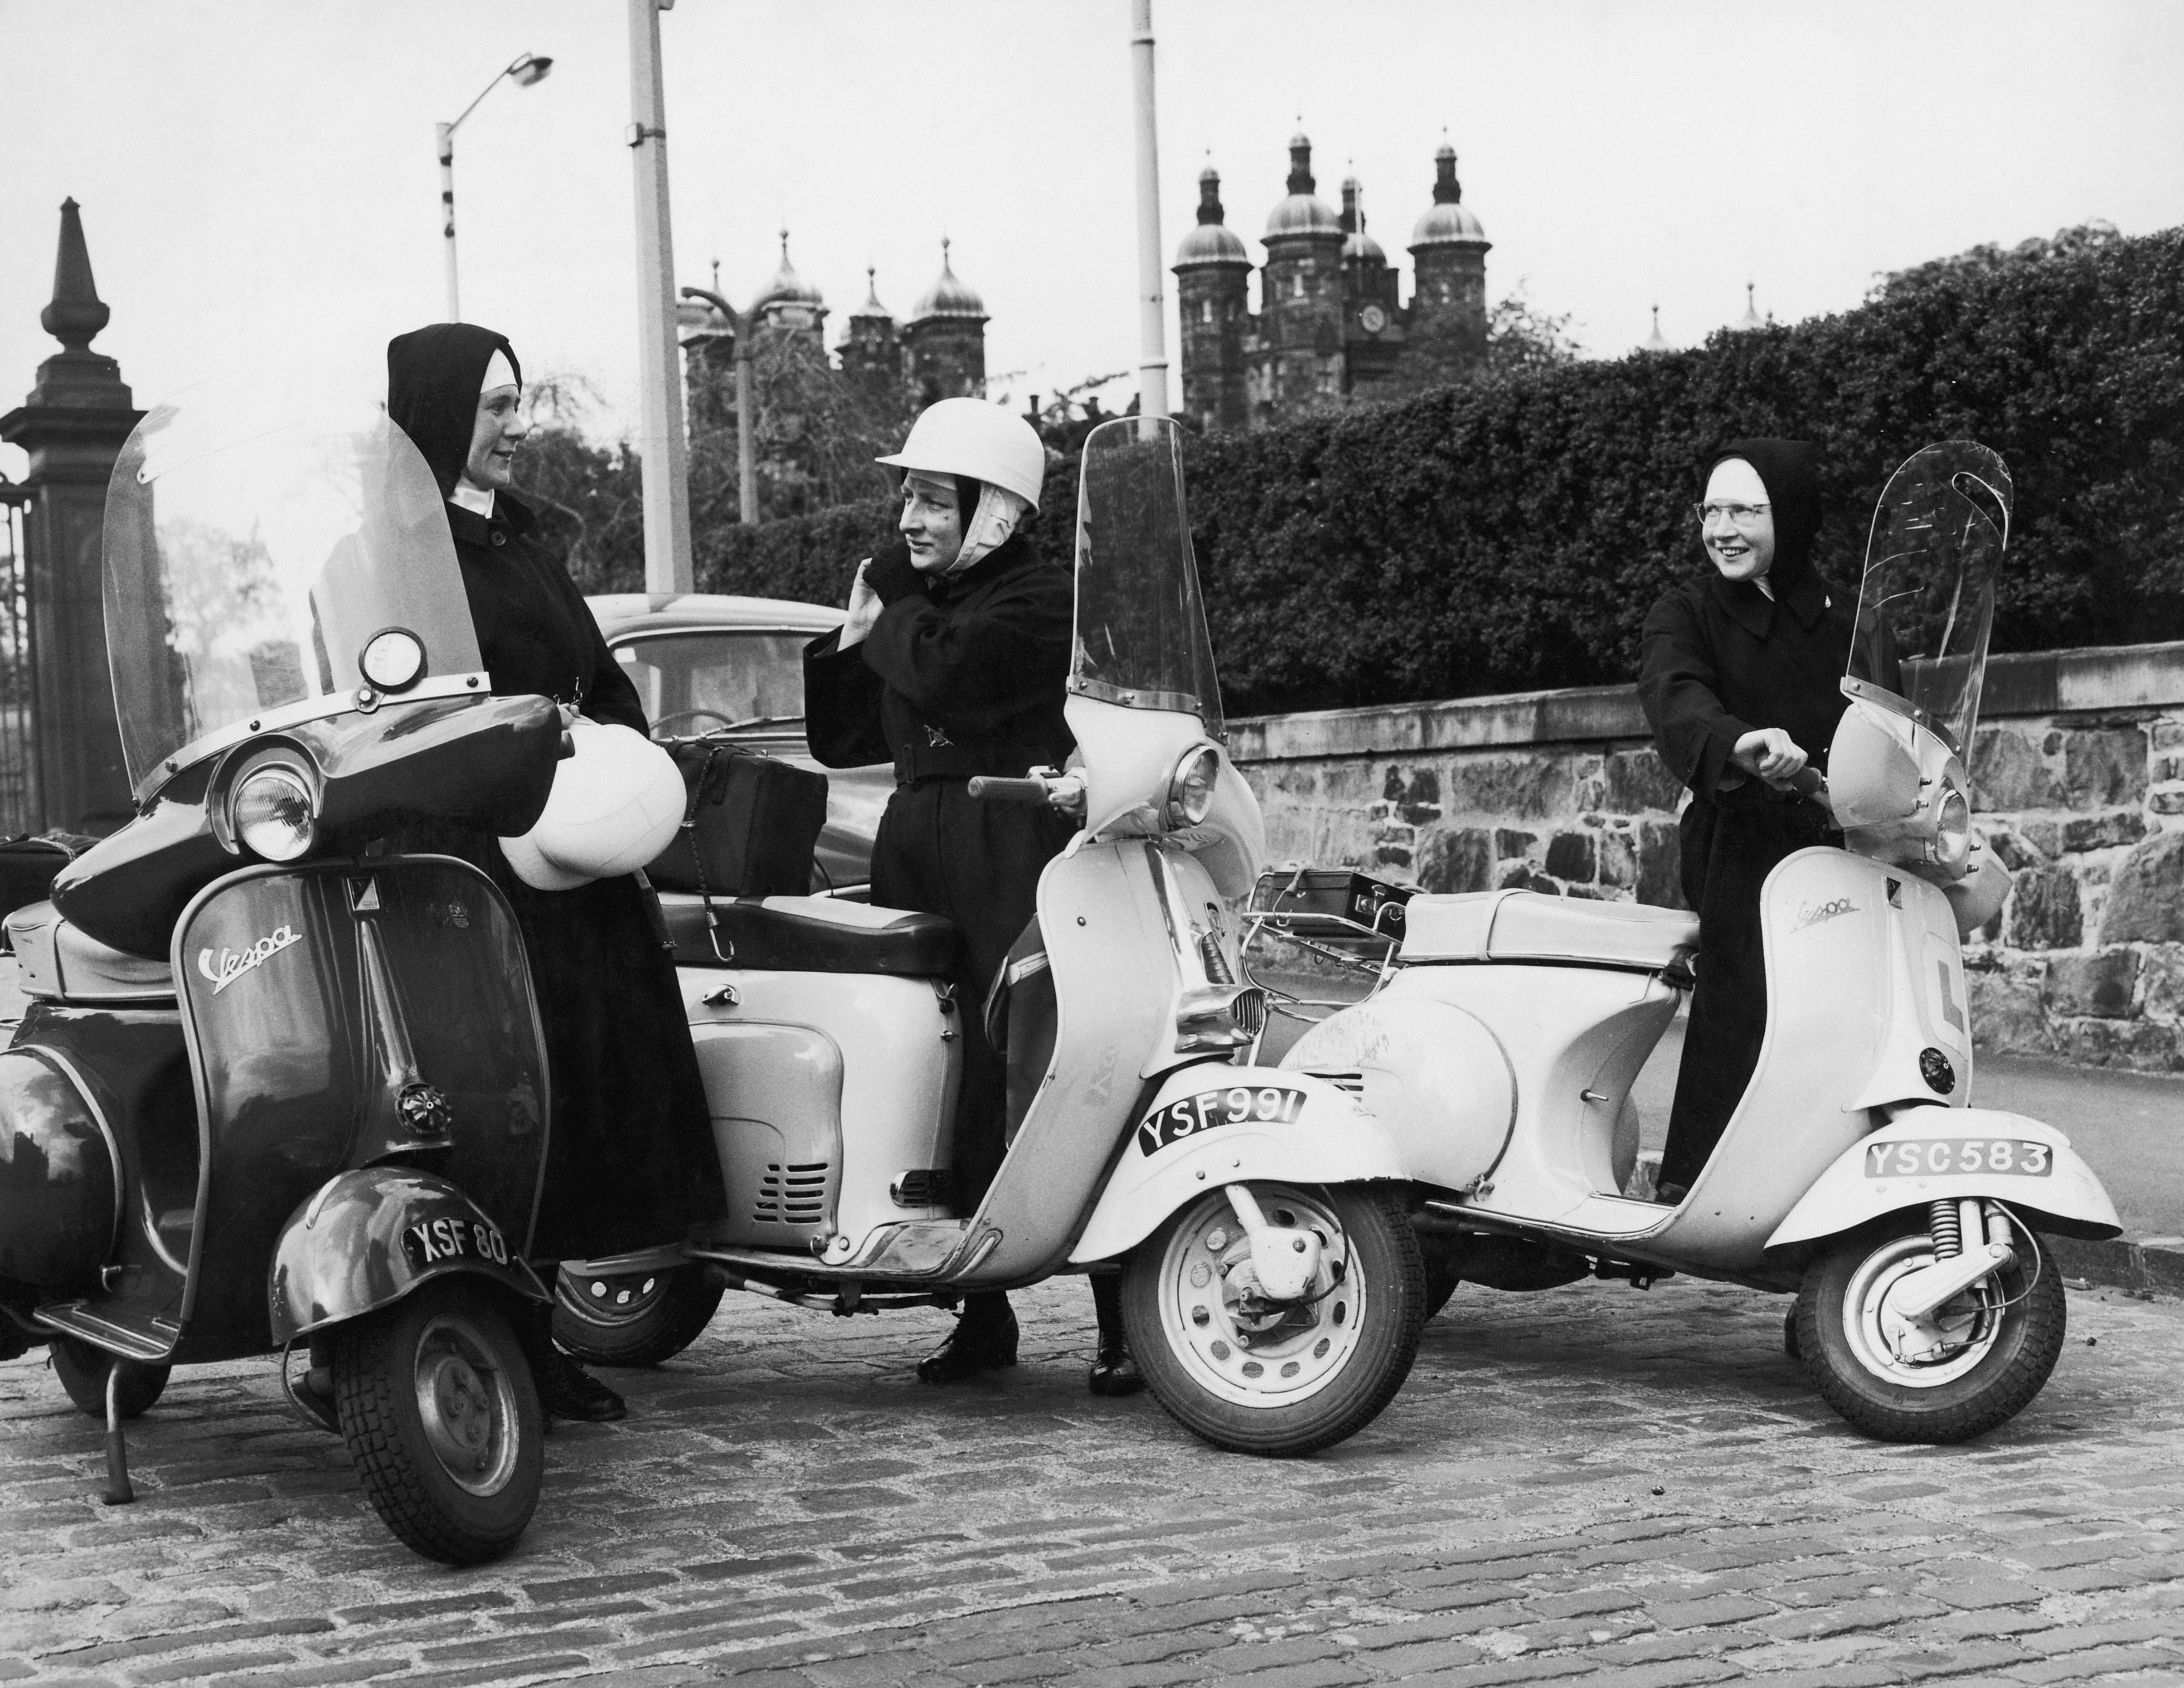 Sisters Stephen, Imelda and Patrick with their motor scooters, Edinburgh, circa 1970. The nuns, of nursing order The Little Sisters Of The Assumption, used their scooters to attend urgent cases of illness in the working class communities of the city. (Photo by Daily Express/Hulton Archive/Getty Images)